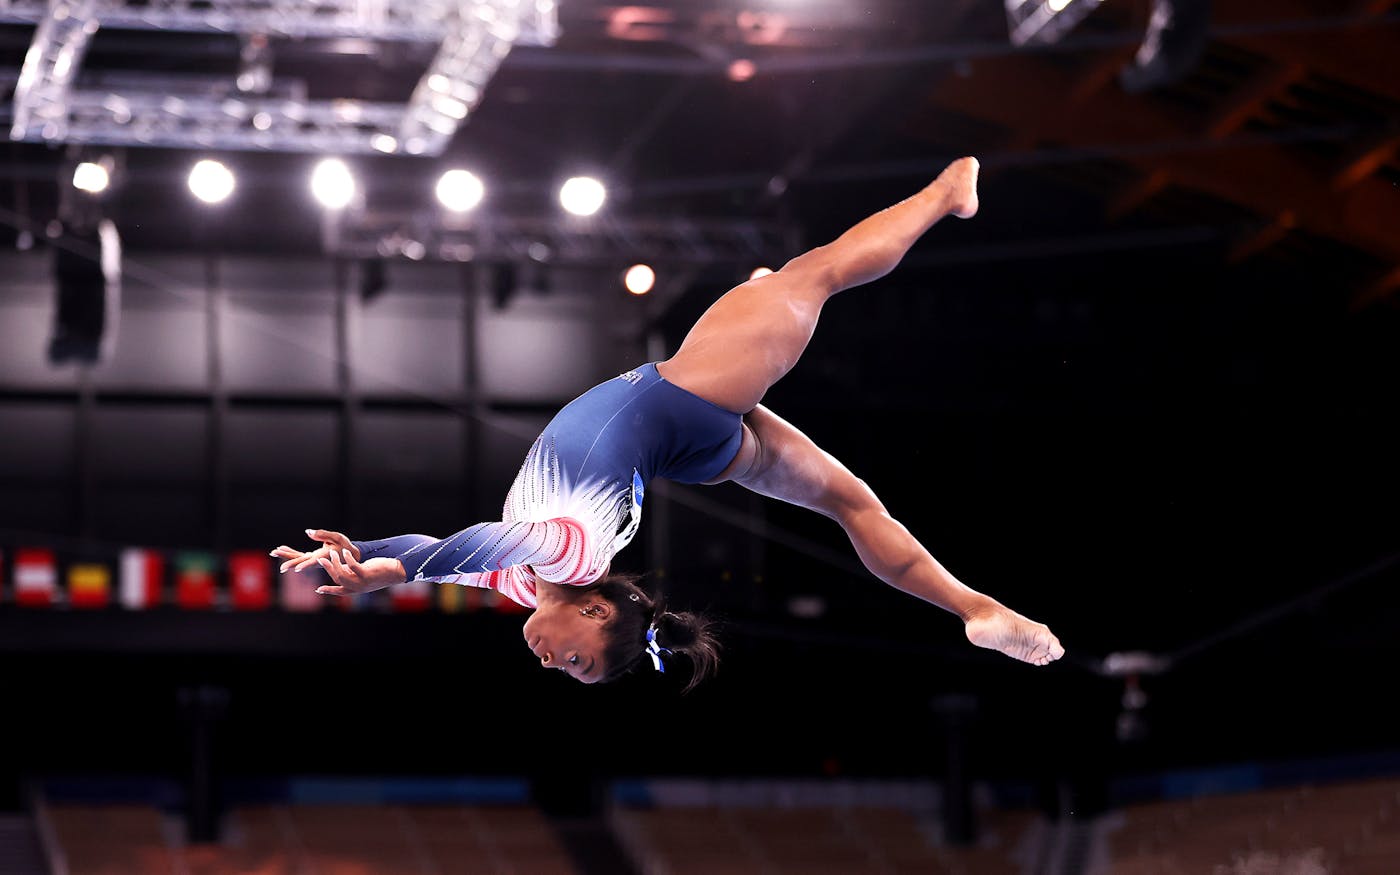 What Should Fans Expect From the Next Phase of Simone Biles's Career?